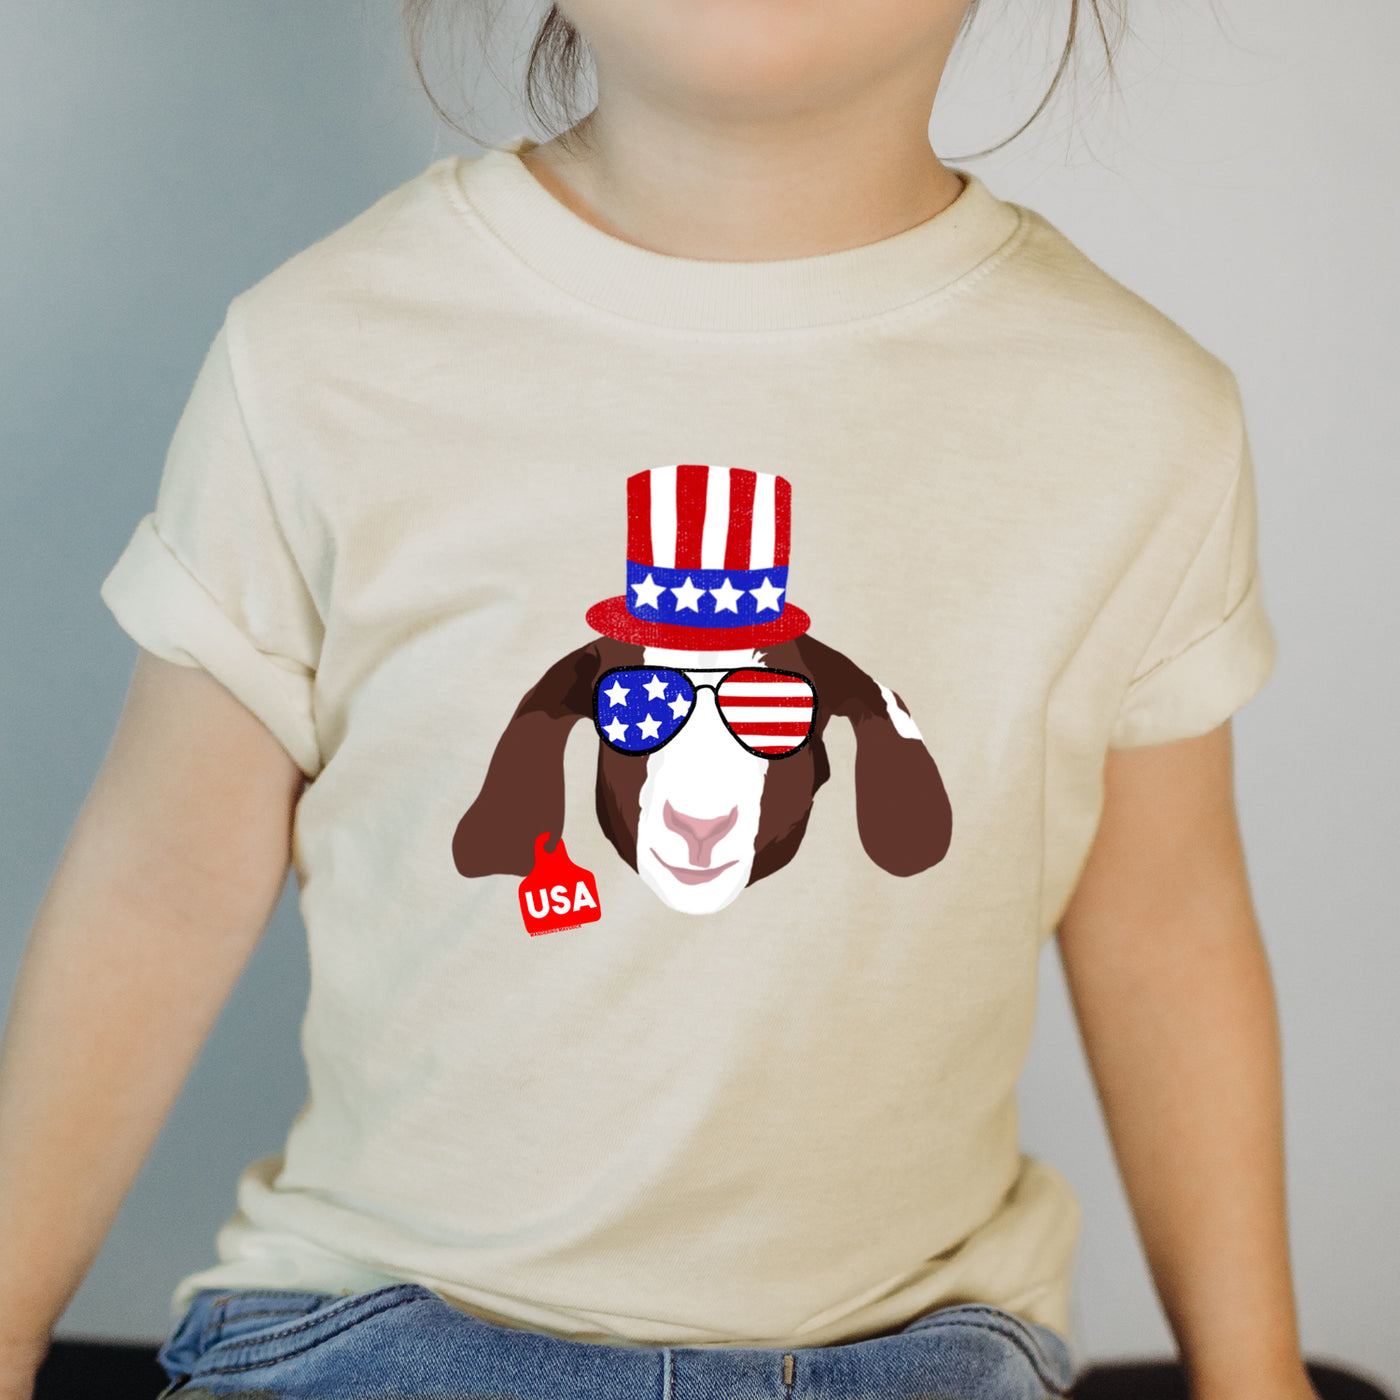 Red, White & Blue Goat One Piece/T-Shirt (Newborn - Youth XL) - Multiple Colors!